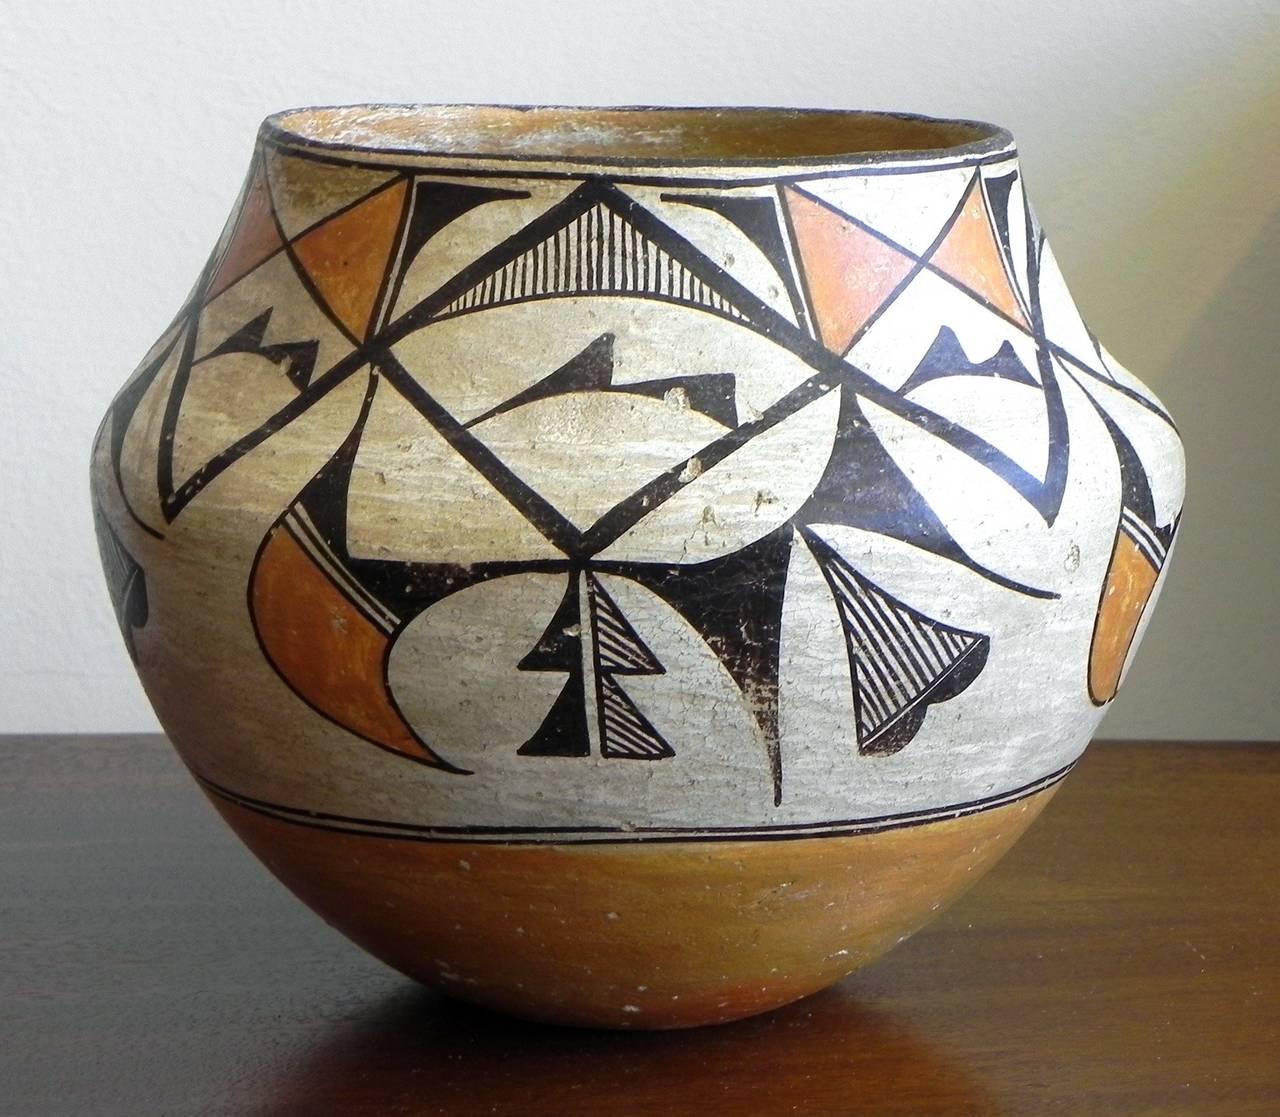 The Acoma pot having a repeating design of abstract foliate, feather and other devices in three colors. The flaring shoulder of the pot lends itself to this nicely proportioned southwestern storage jar.